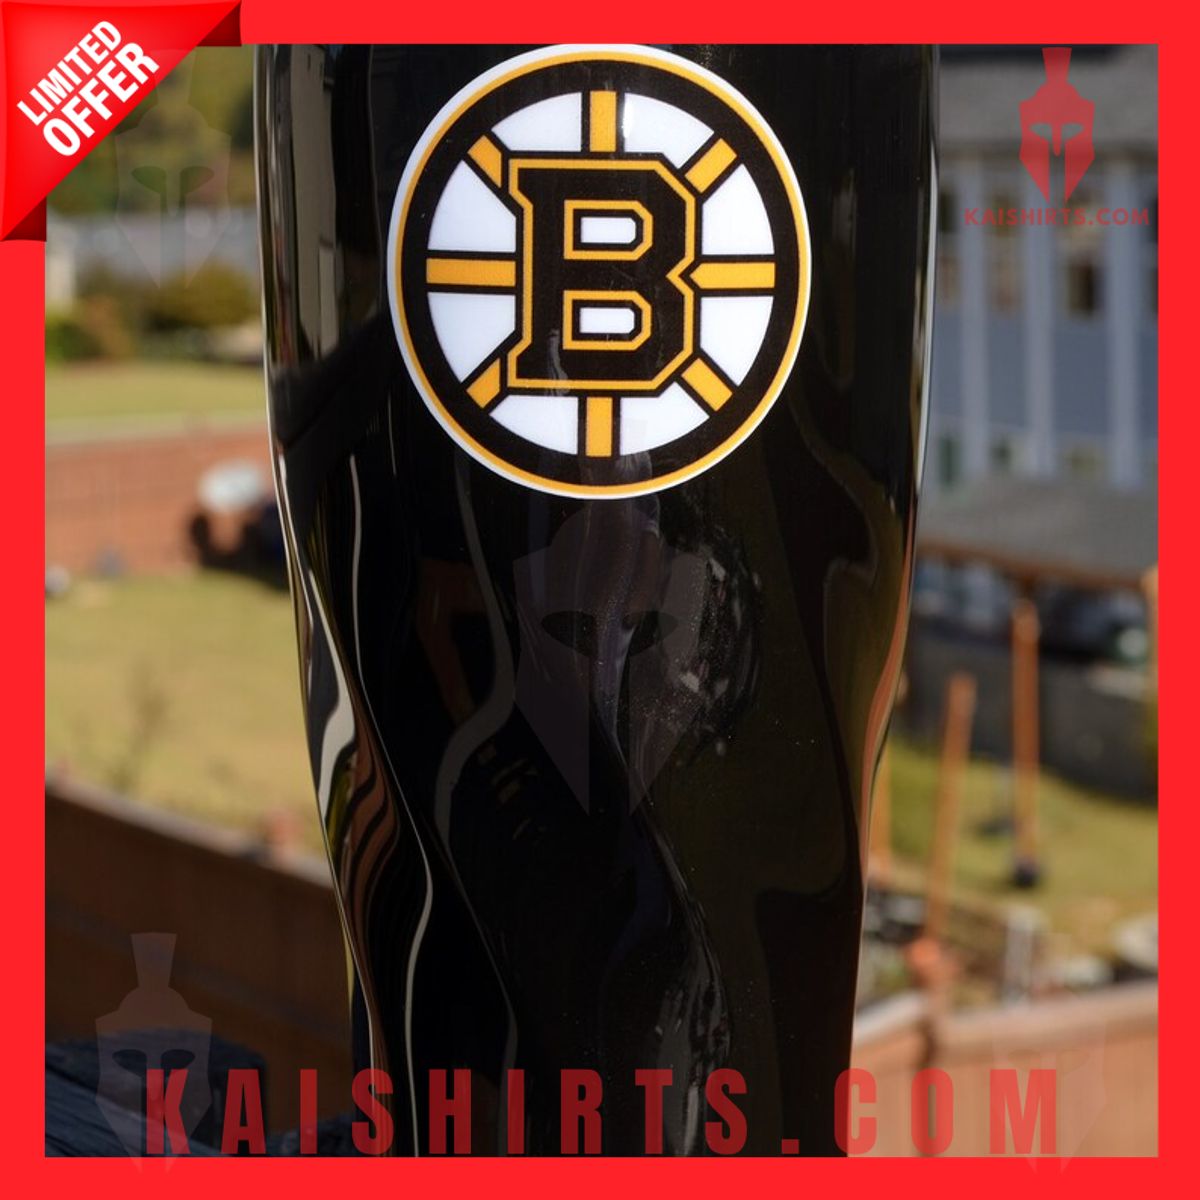 Boston Bruins Stainless Steel Tumbler's Product Pictures - Kaishirts.com